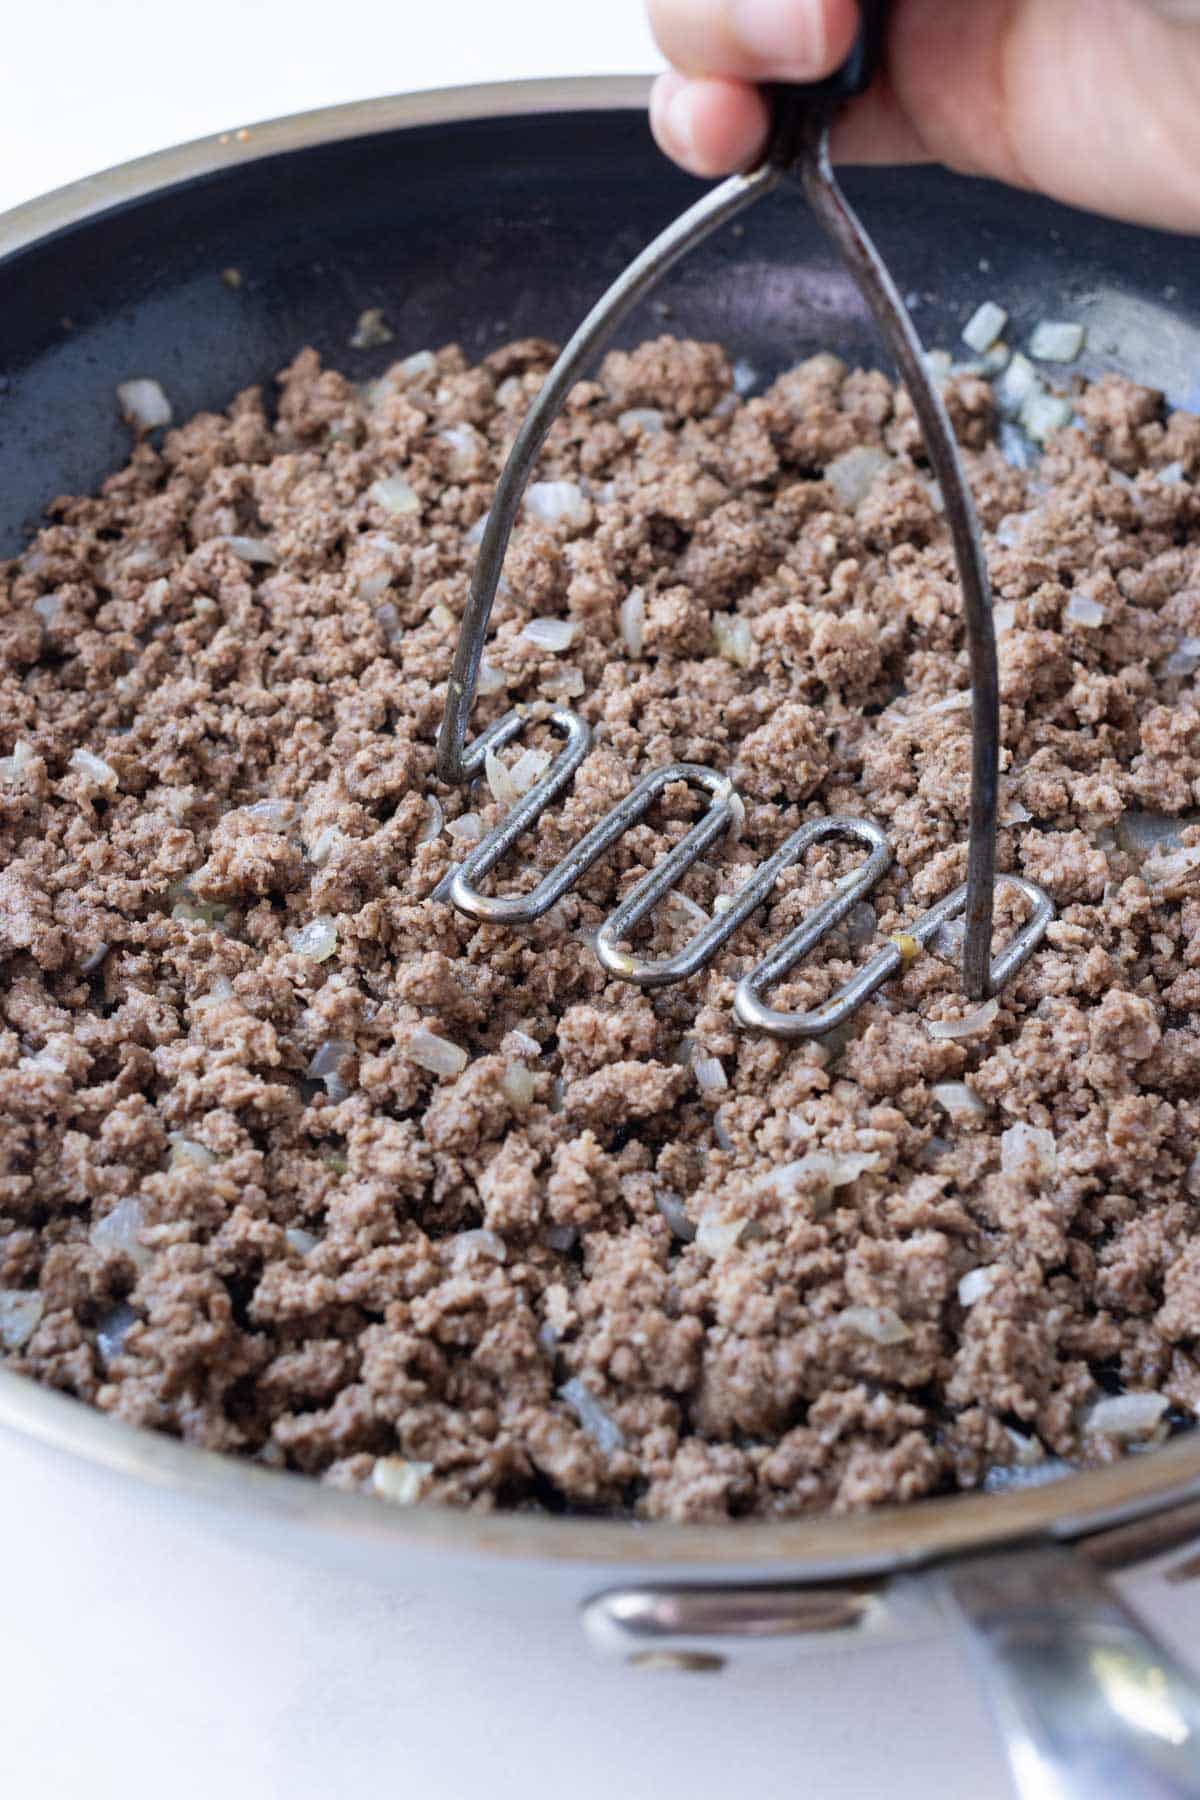 Ground meat is cooked and crumbled in a pan.